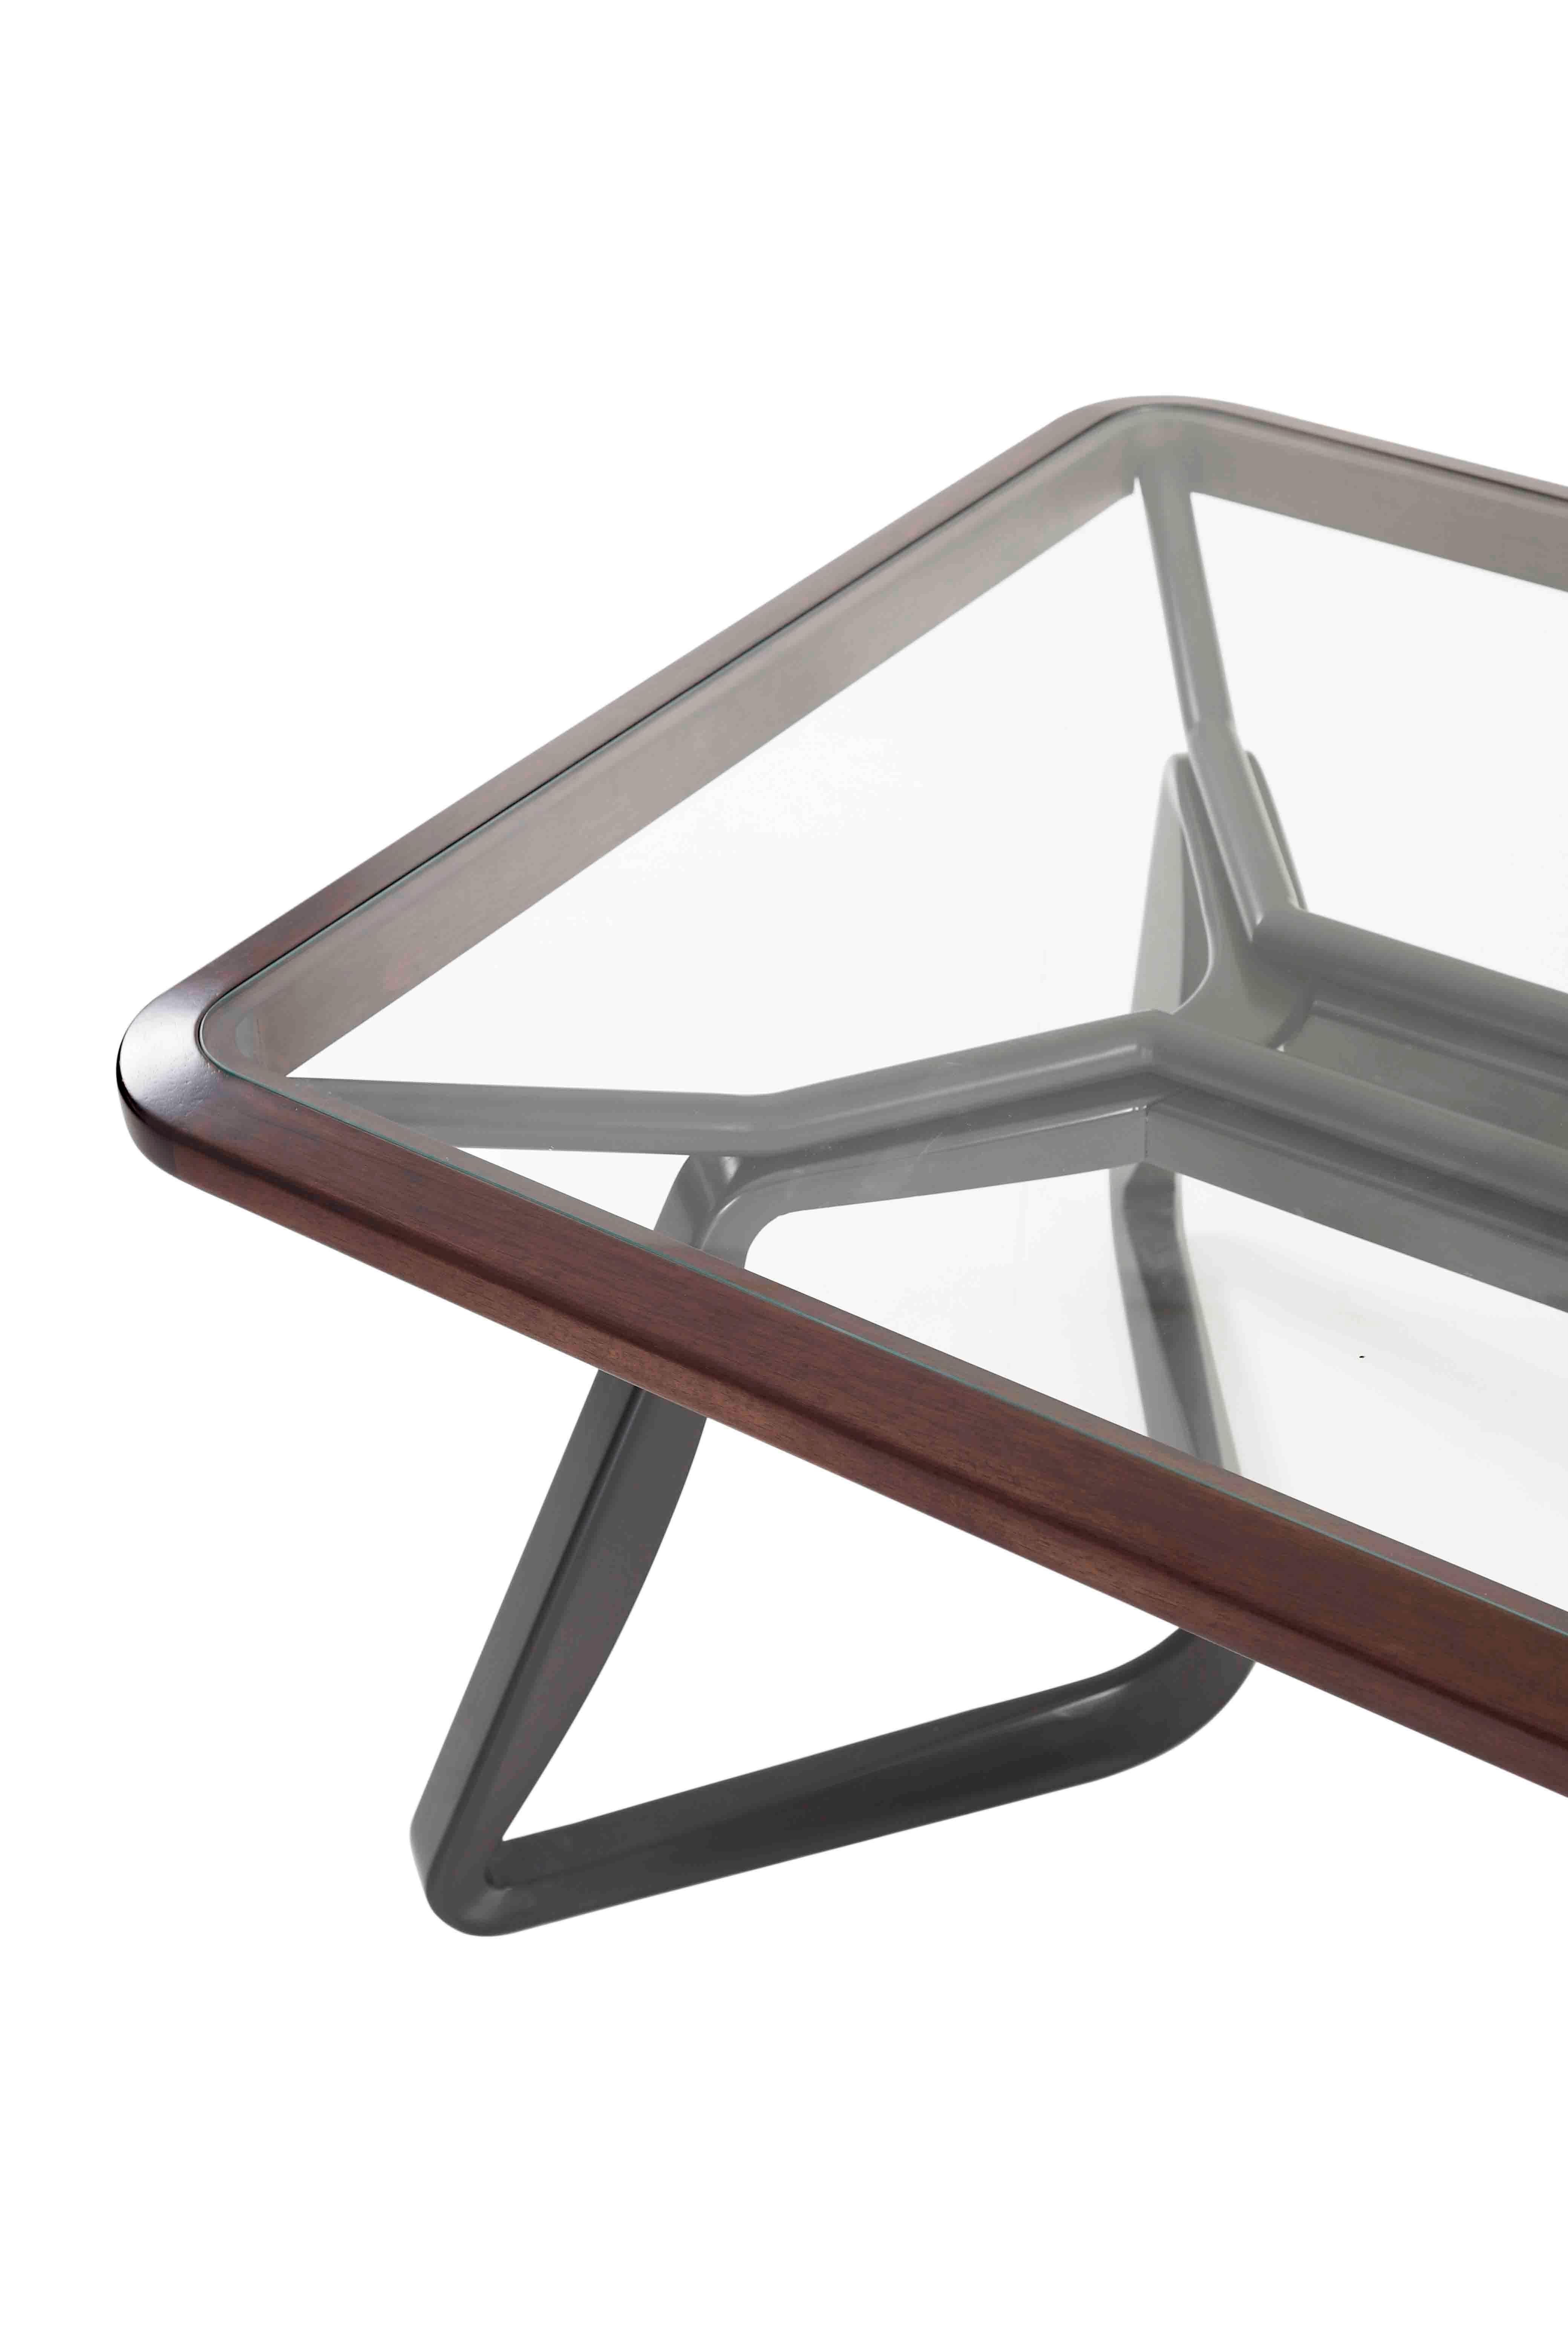 Featuring a metal frame, our dining table time with glass top gives it a light look that pairs well with upholstered chairs

Key details: Clear glass top, wood, and metal
Made in Brazil
Structure: Black metal
Top: laminated glass and wood
Care: Dust